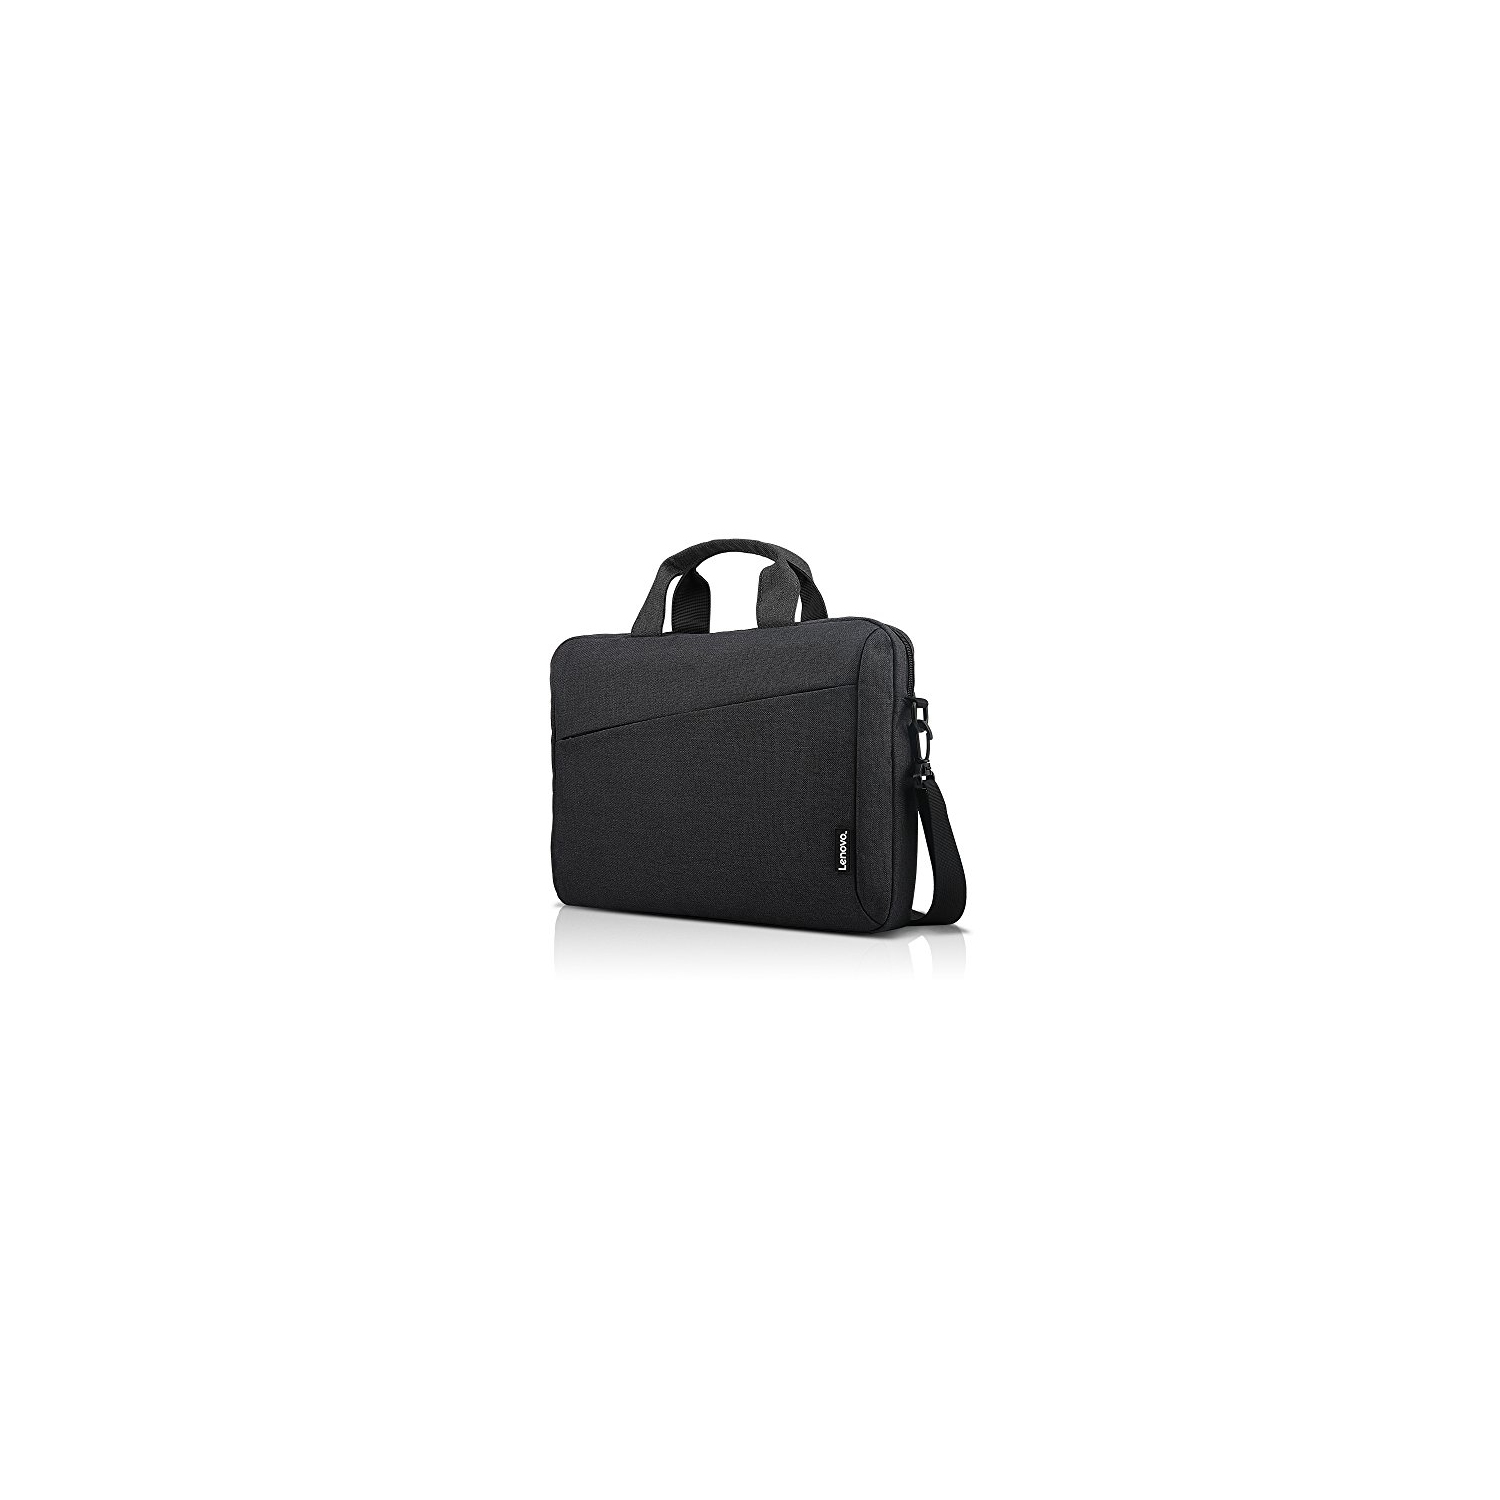 Lenovo Laptop Carrying Case T210, fits for 15.6-Inch Laptop/ Tablet, Sleek Design and Water-Repellent Fabric,